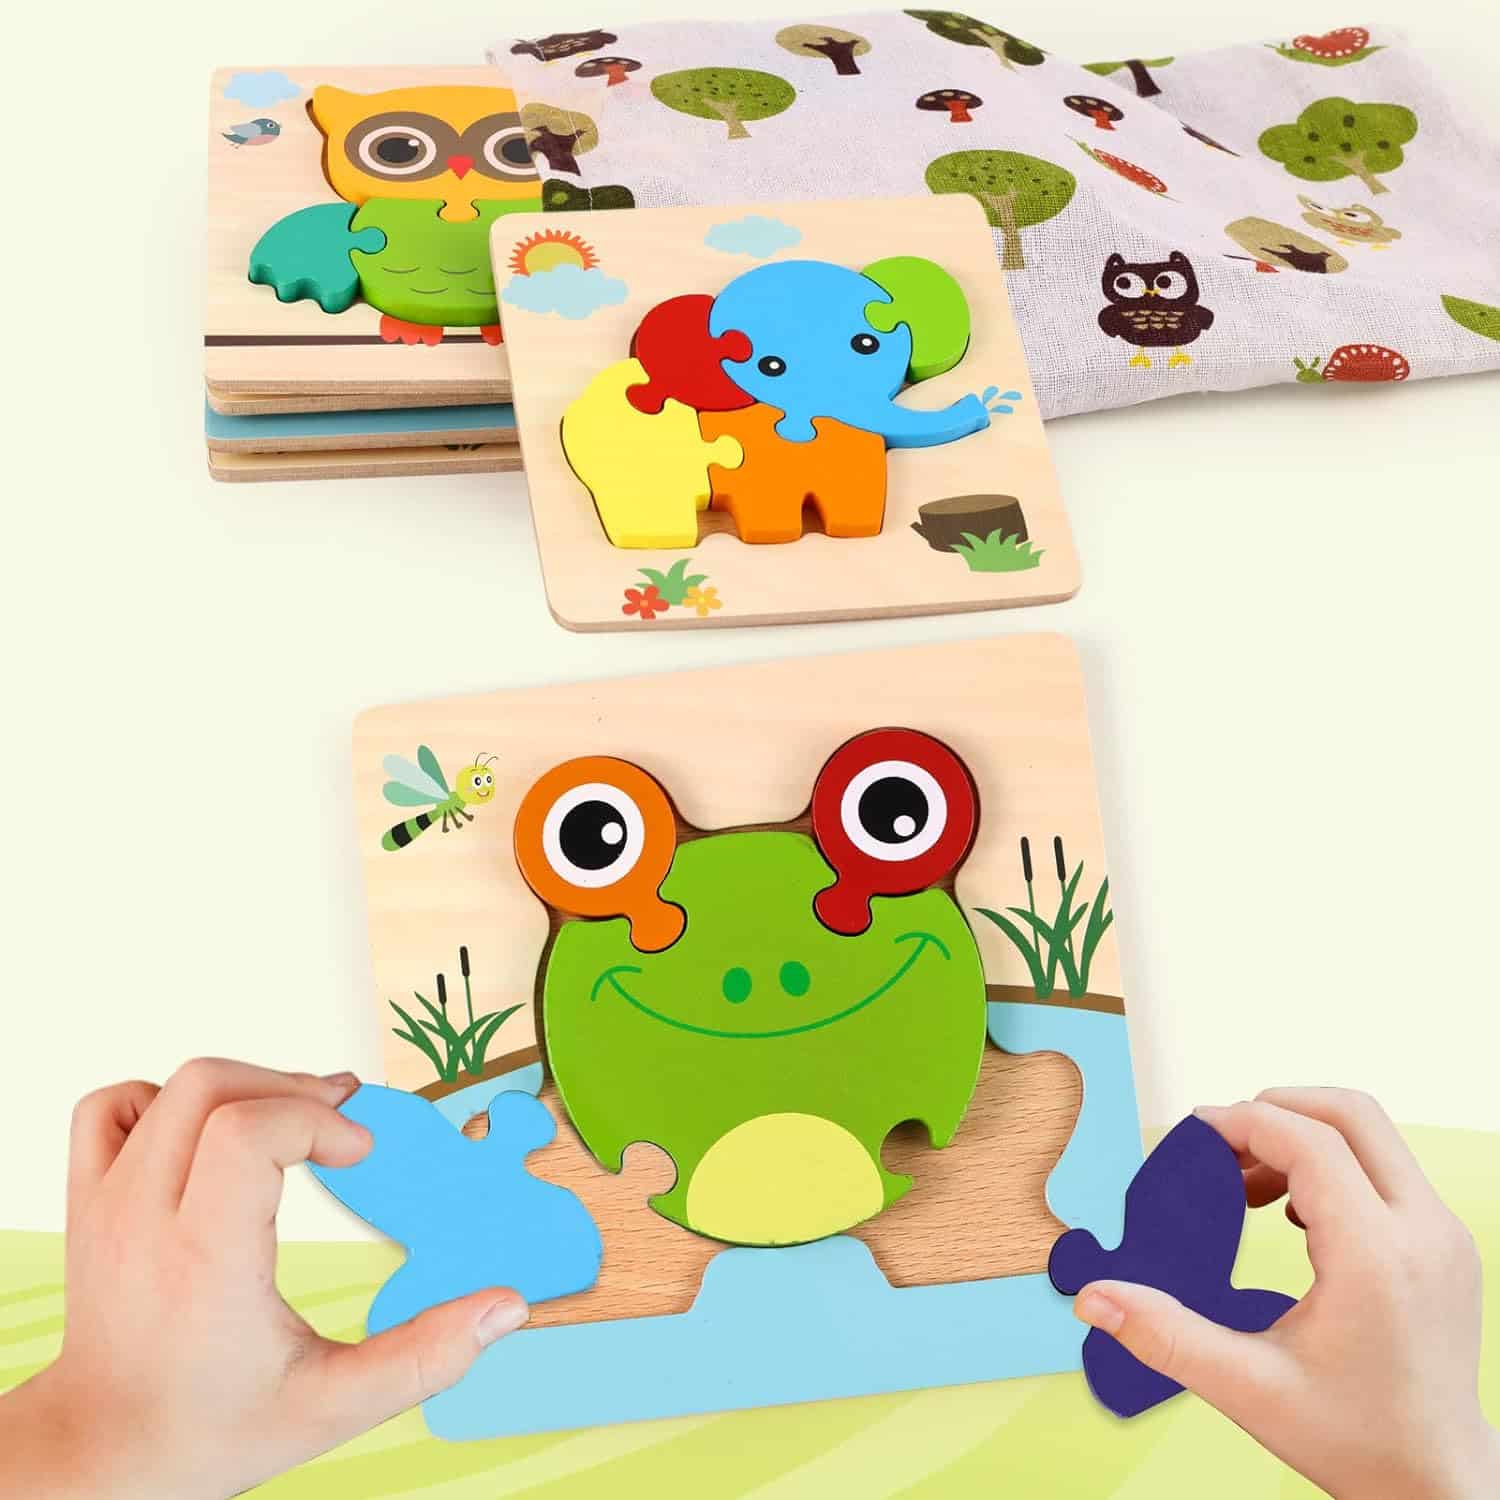 Wooden Jigsaw Puzzles - Educational Fun for Kids | Product Review